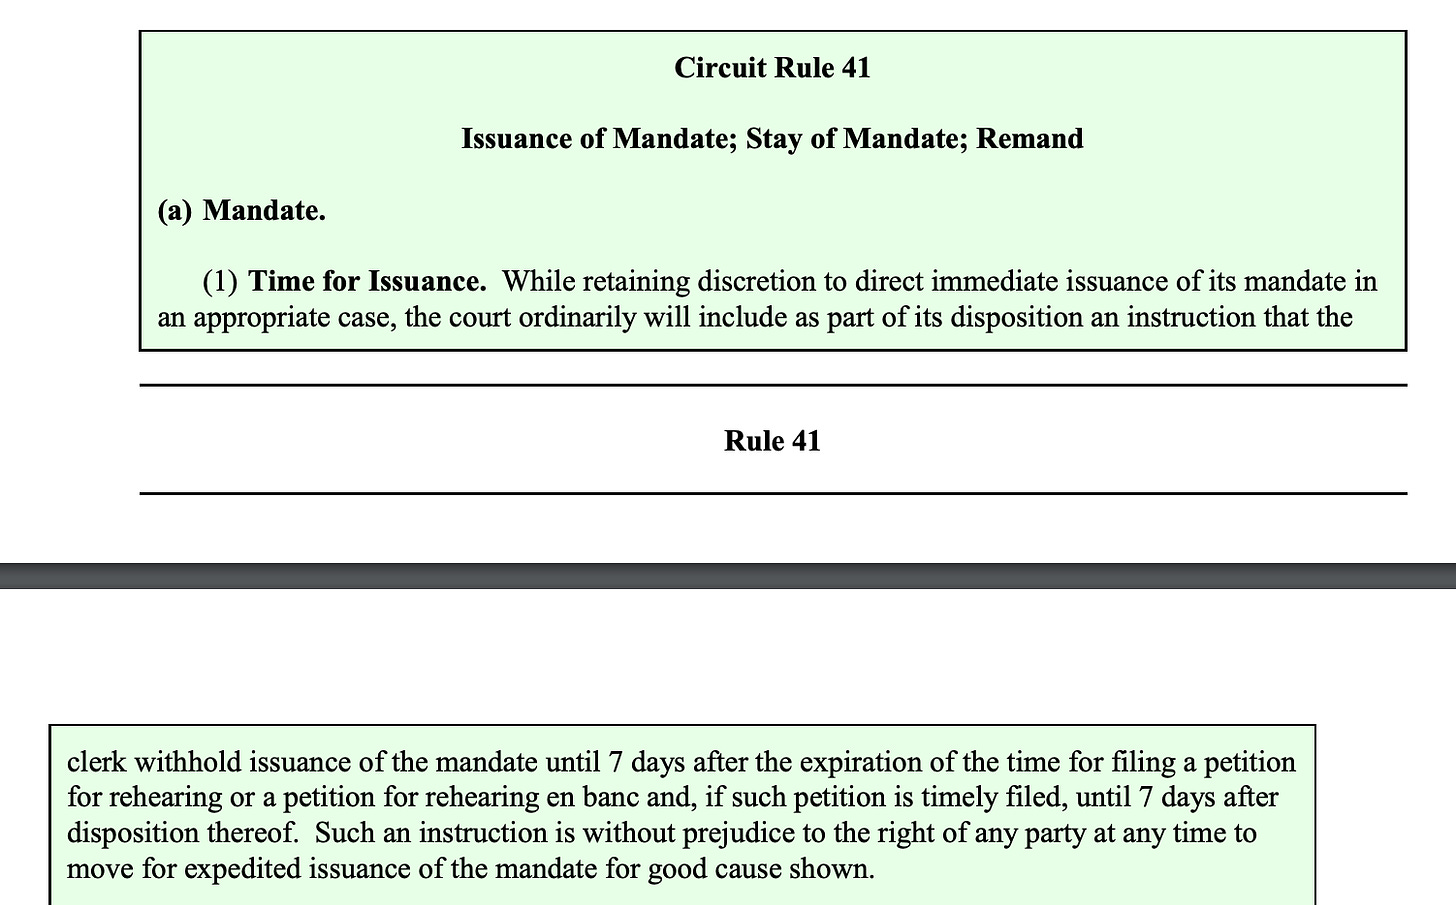 Circuit Rule 41 Issuance of Mandate; Stay of Mandate; Remand (a) Mandate. (1) Time for Issuance. While retaining discretion to direct immediate issuance of its mandate in an appropriate case, the court ordinarily will include as part of its disposition an instruction that the clerk withhold issuance of the mandate until 7 days after the expiration of the time for filing a petition for rehearing or a petition for rehearing en banc and, if such petition is timely filed, until 7 days after disposition thereof. Such an instruction is without prejudice to the right of any party at any time to move for expedited issuance of the mandate for good cause shown.